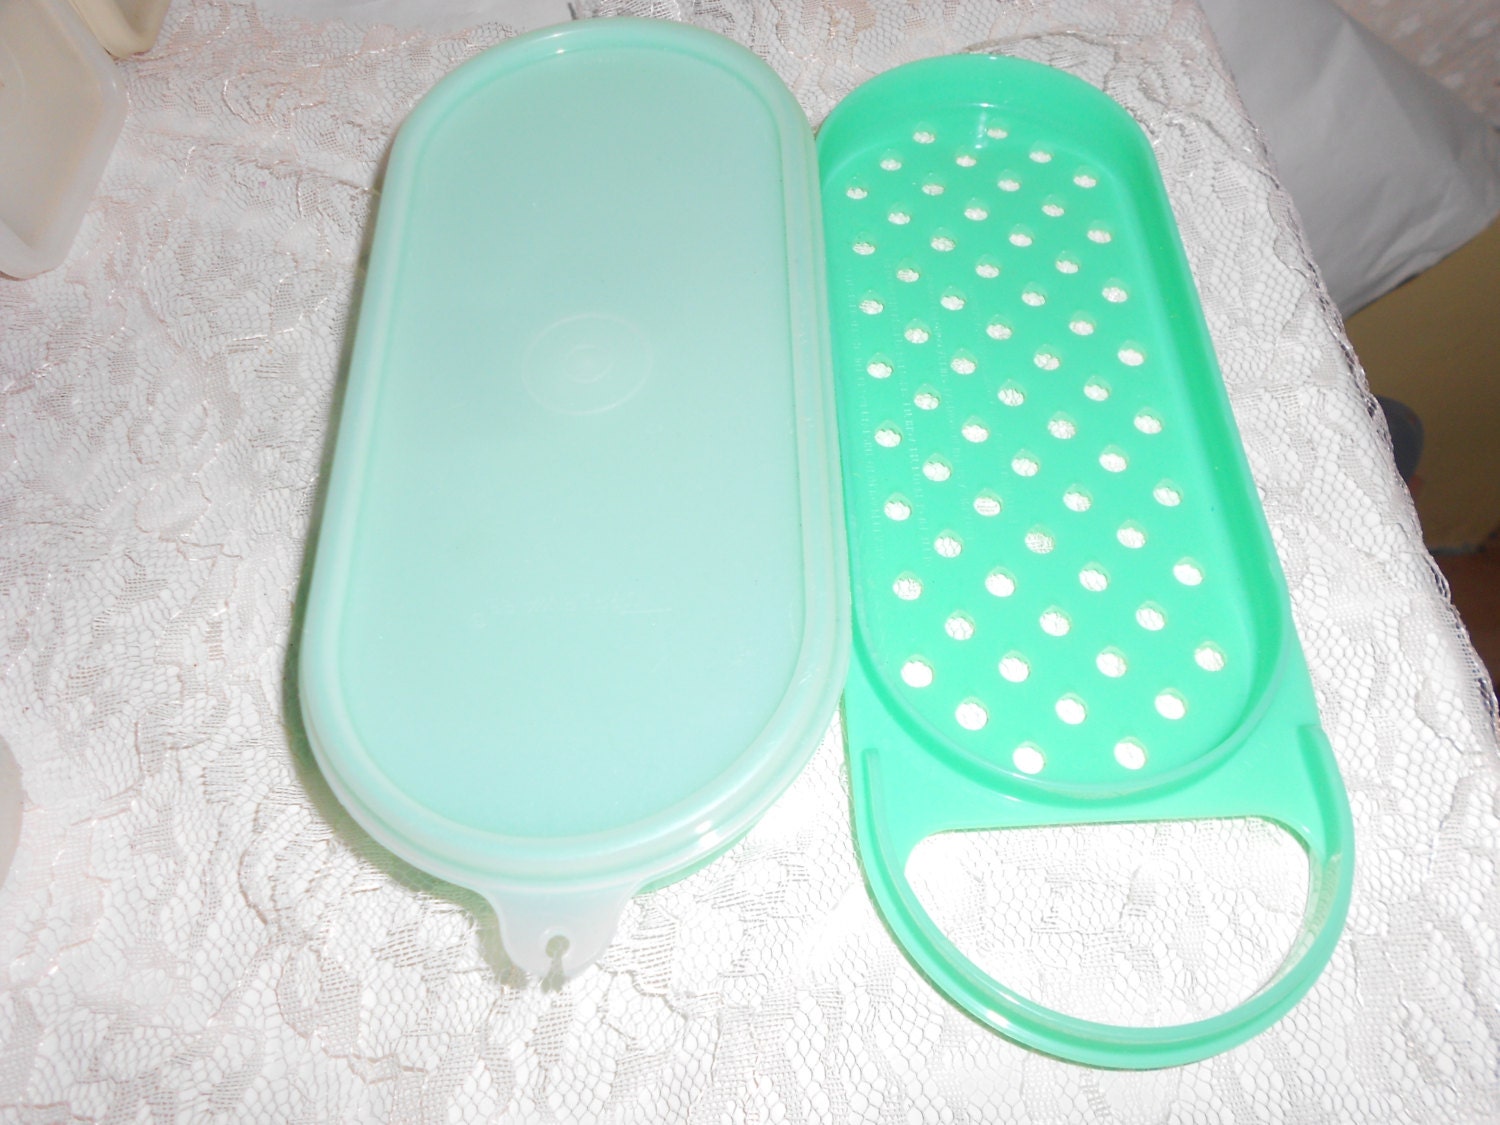 Miniature Tupperware Cheese Grater Vintage Collection – Miniature